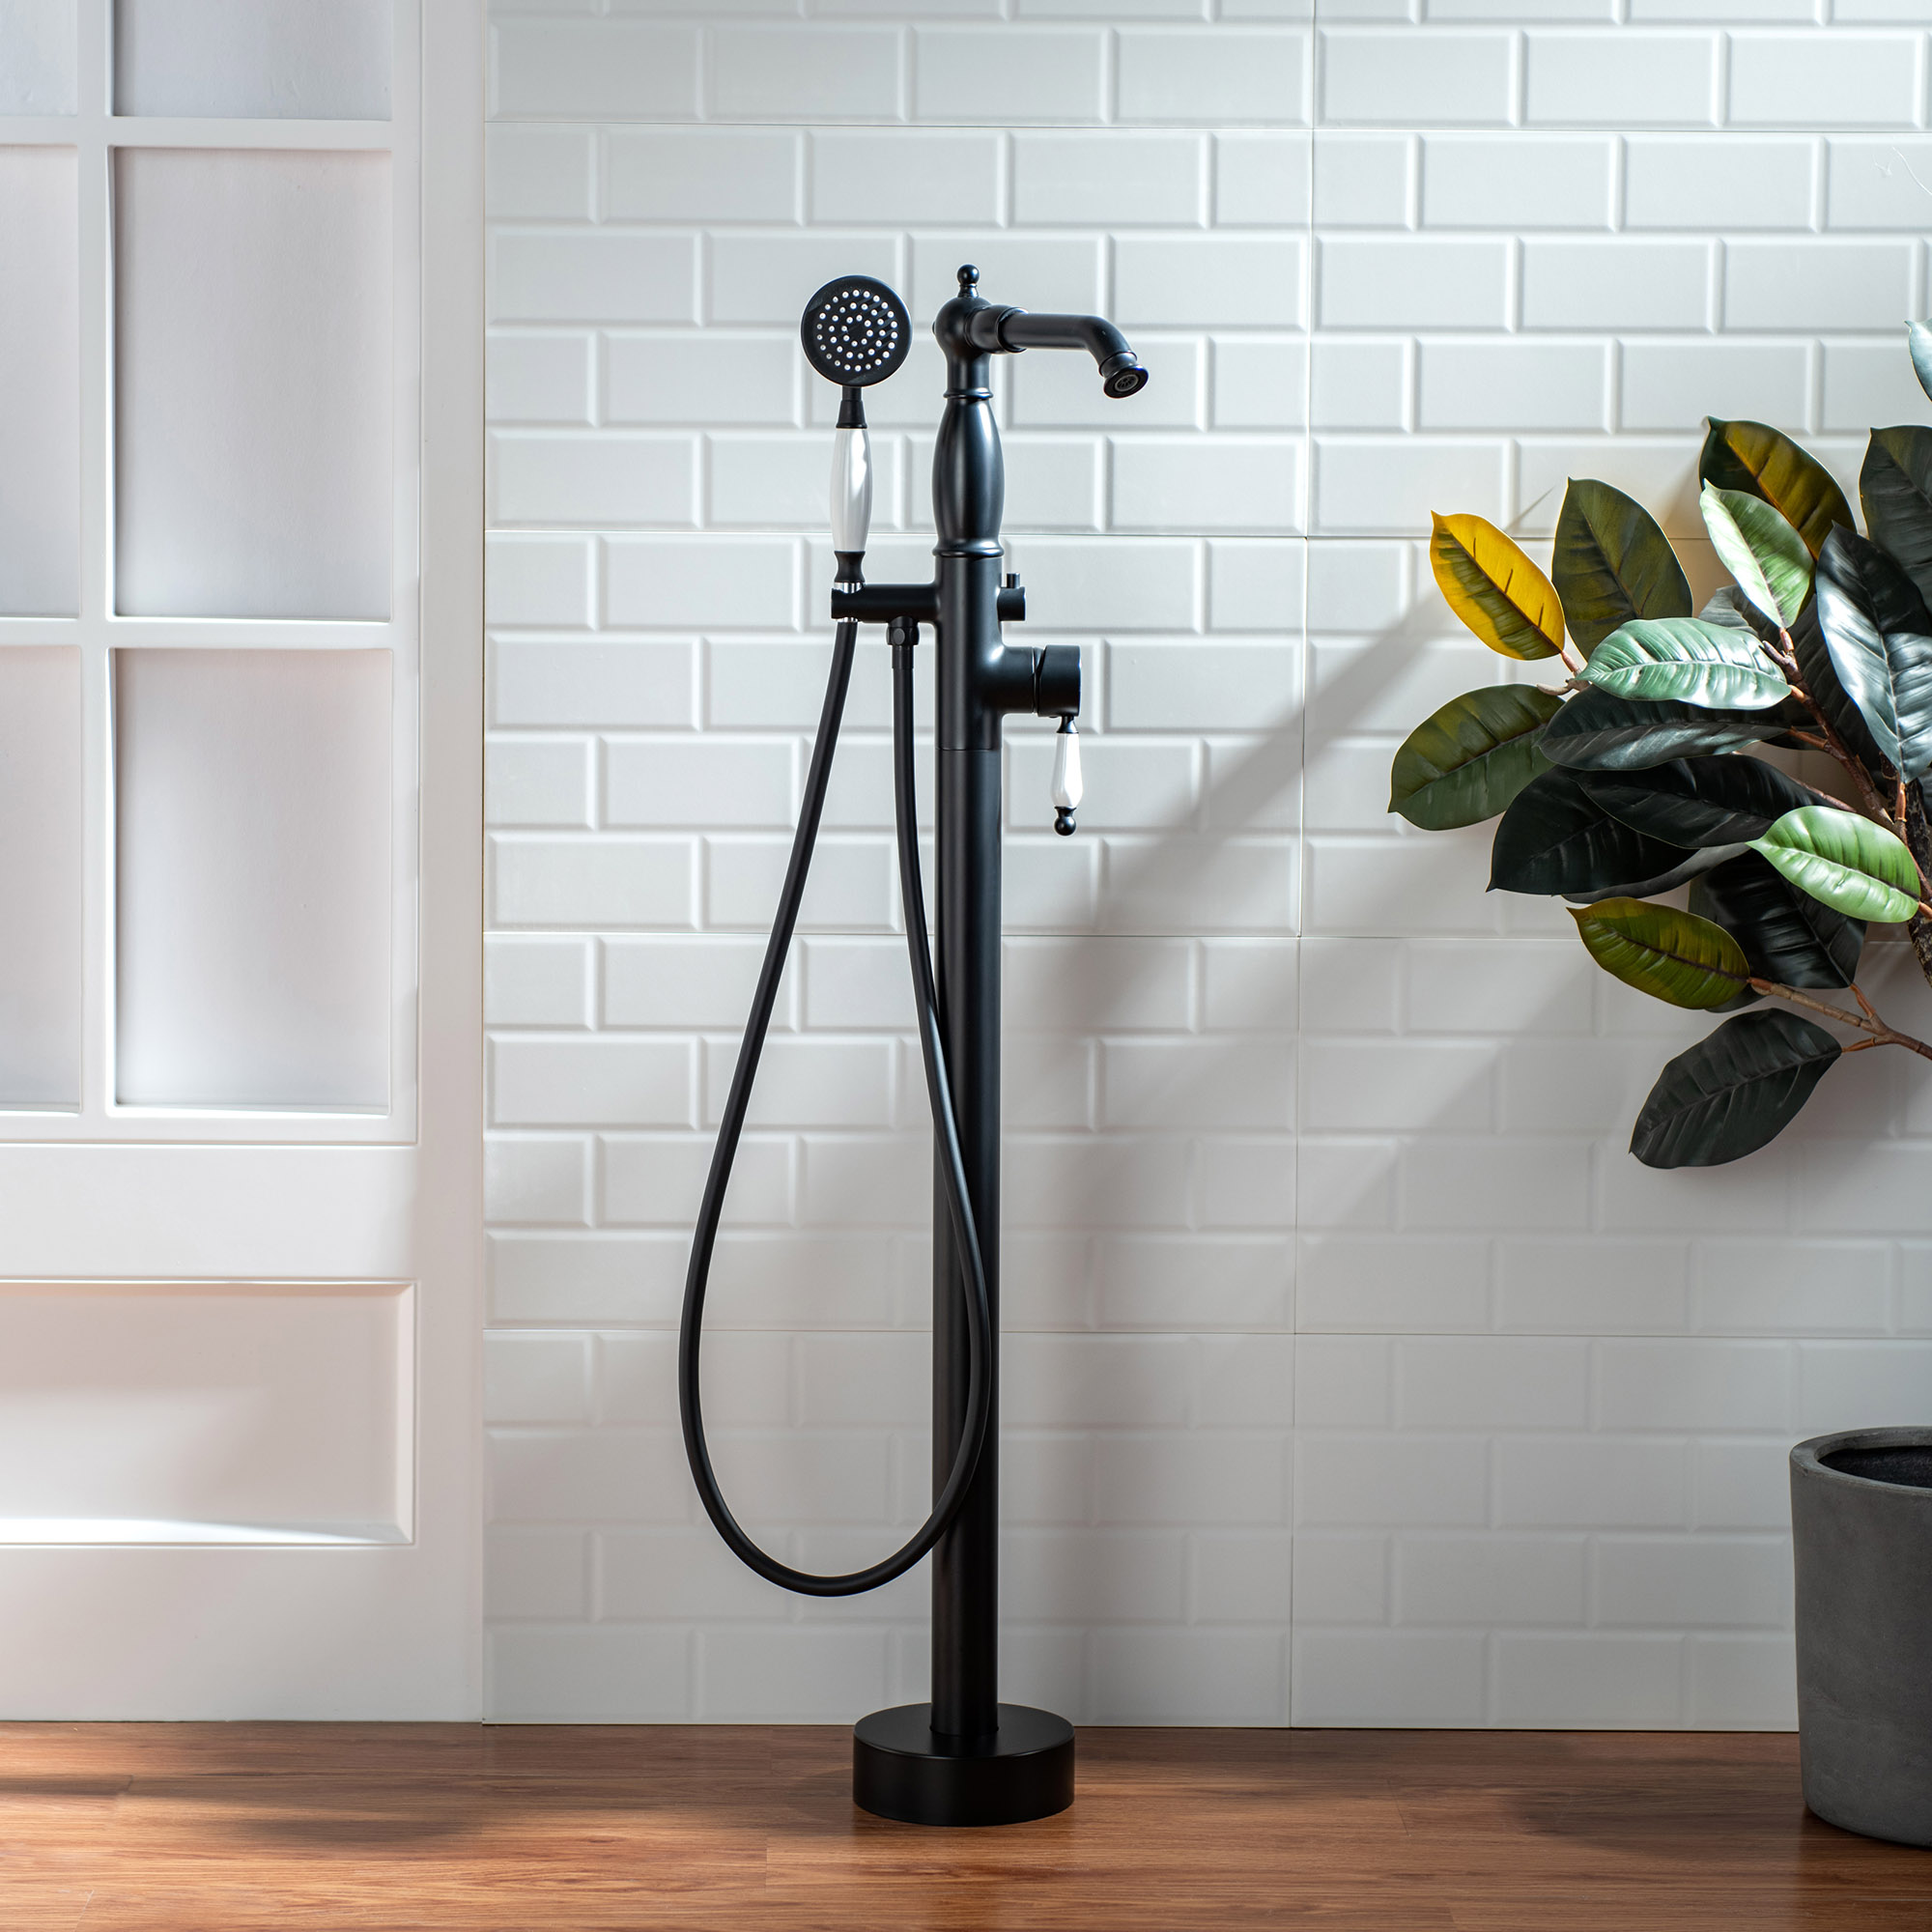  WOODBRIDGE F0048MB Fusion Single Handle Floor Mount Freestanding Tub Filler Faucet with Telephone Hand shower in Matte Black Finish_12262